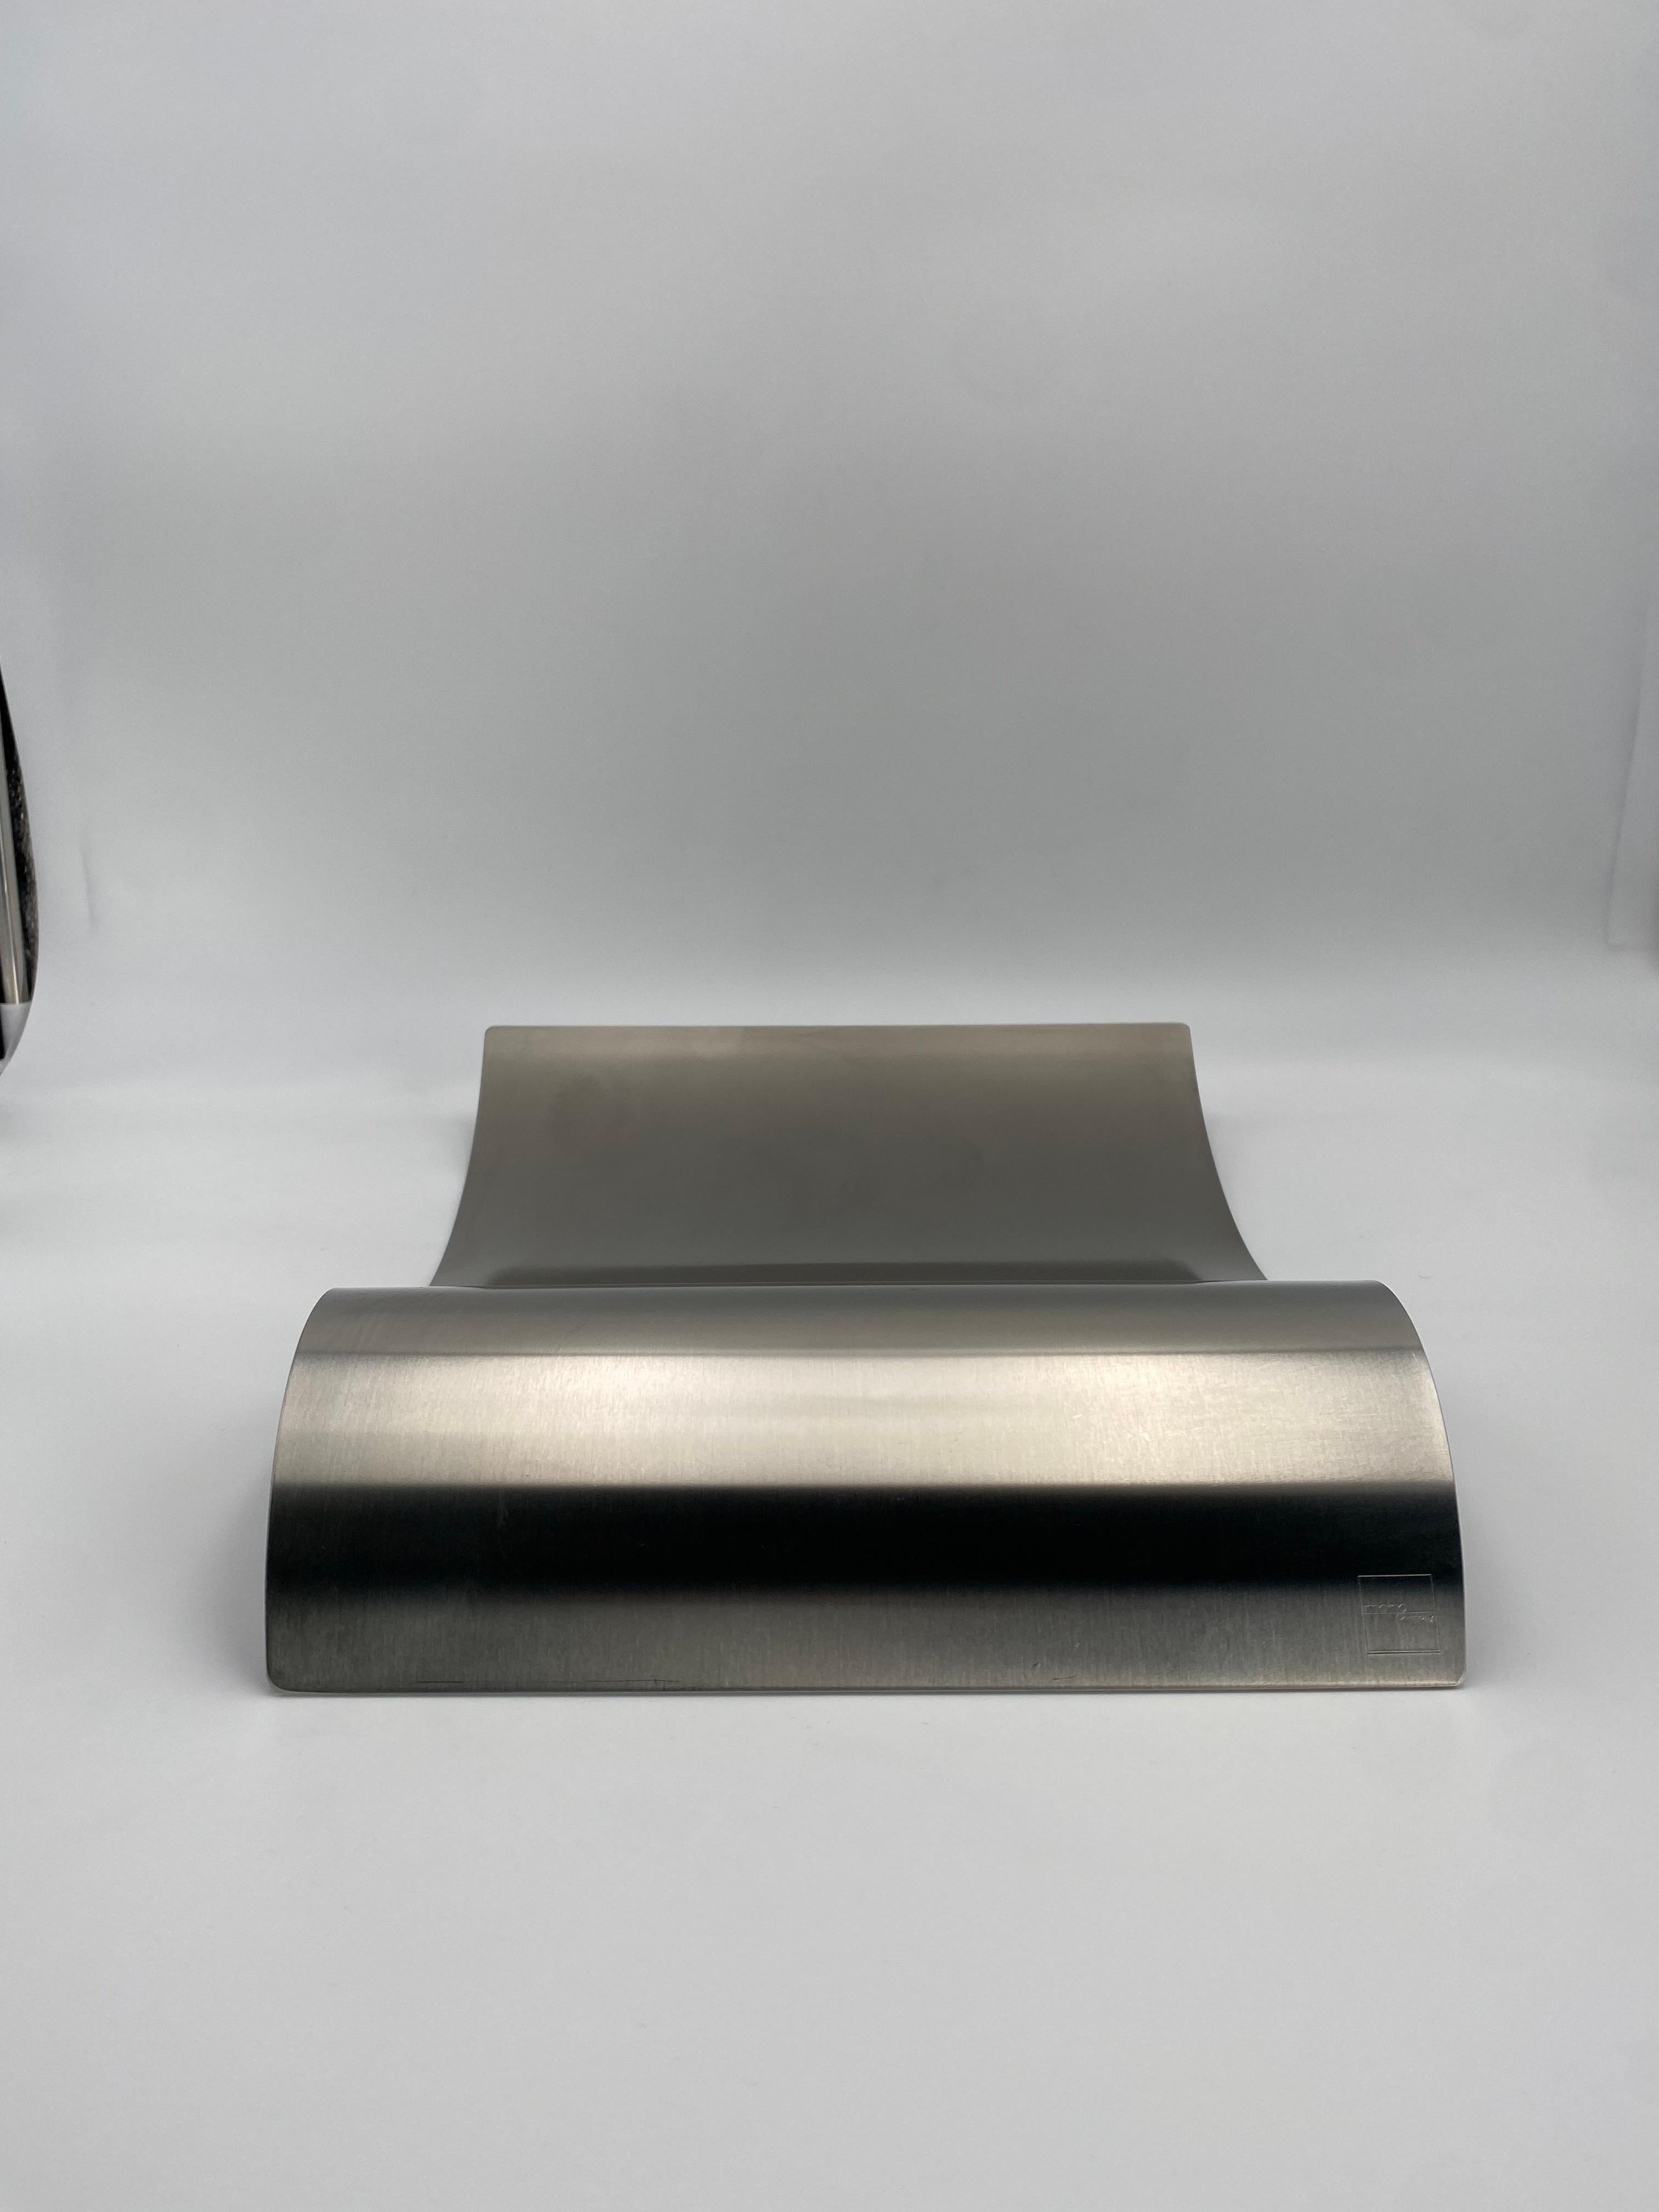 Stainless Steel Wave Tray By MONO, Germany 2000's In Good Condition For Sale In Costa Mesa, CA